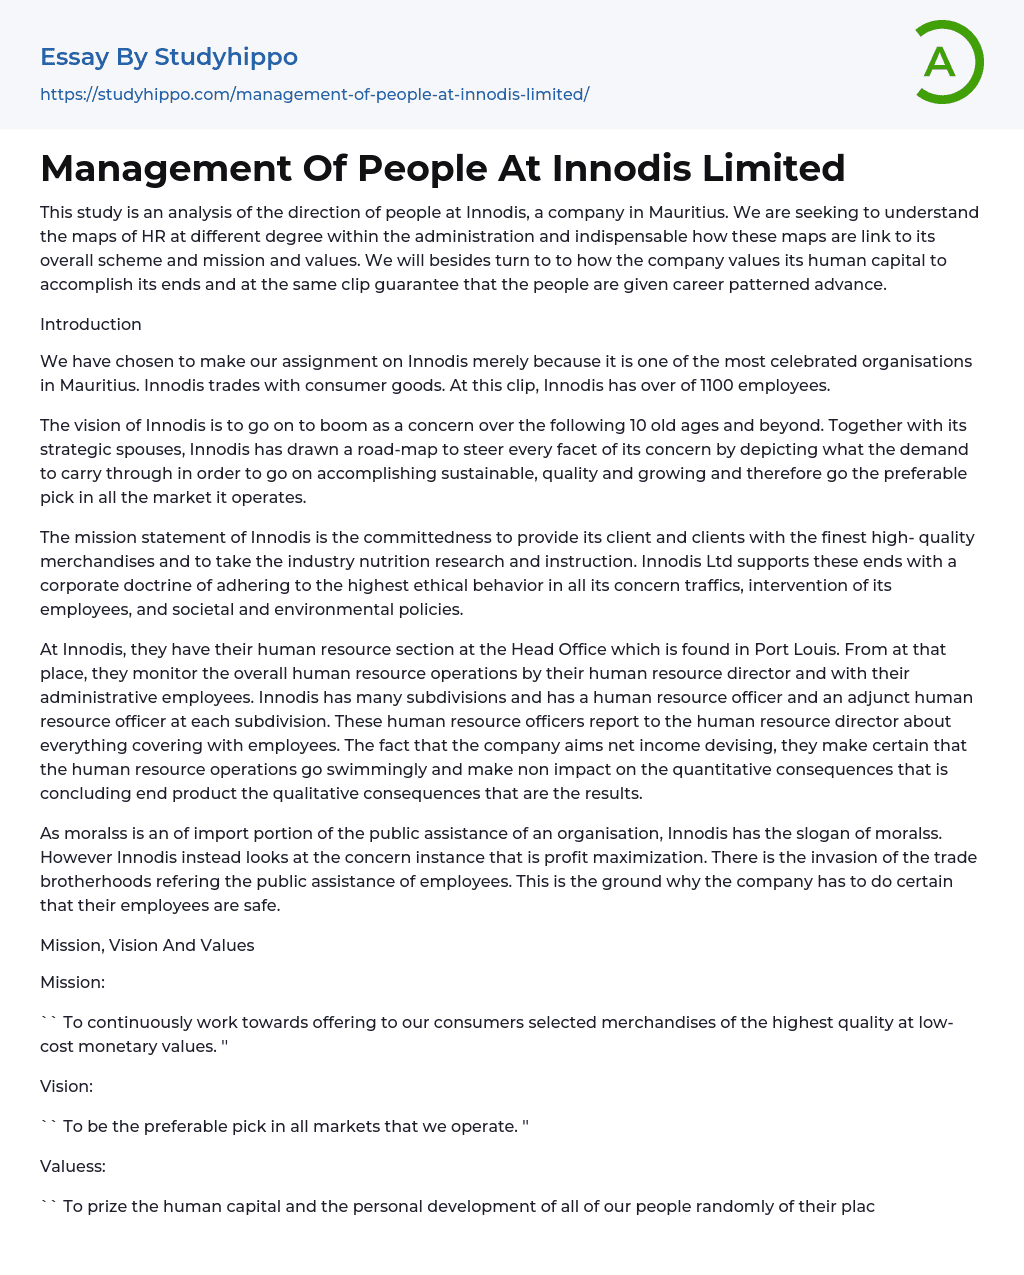 Management Of People At Innodis Limited Essay Example